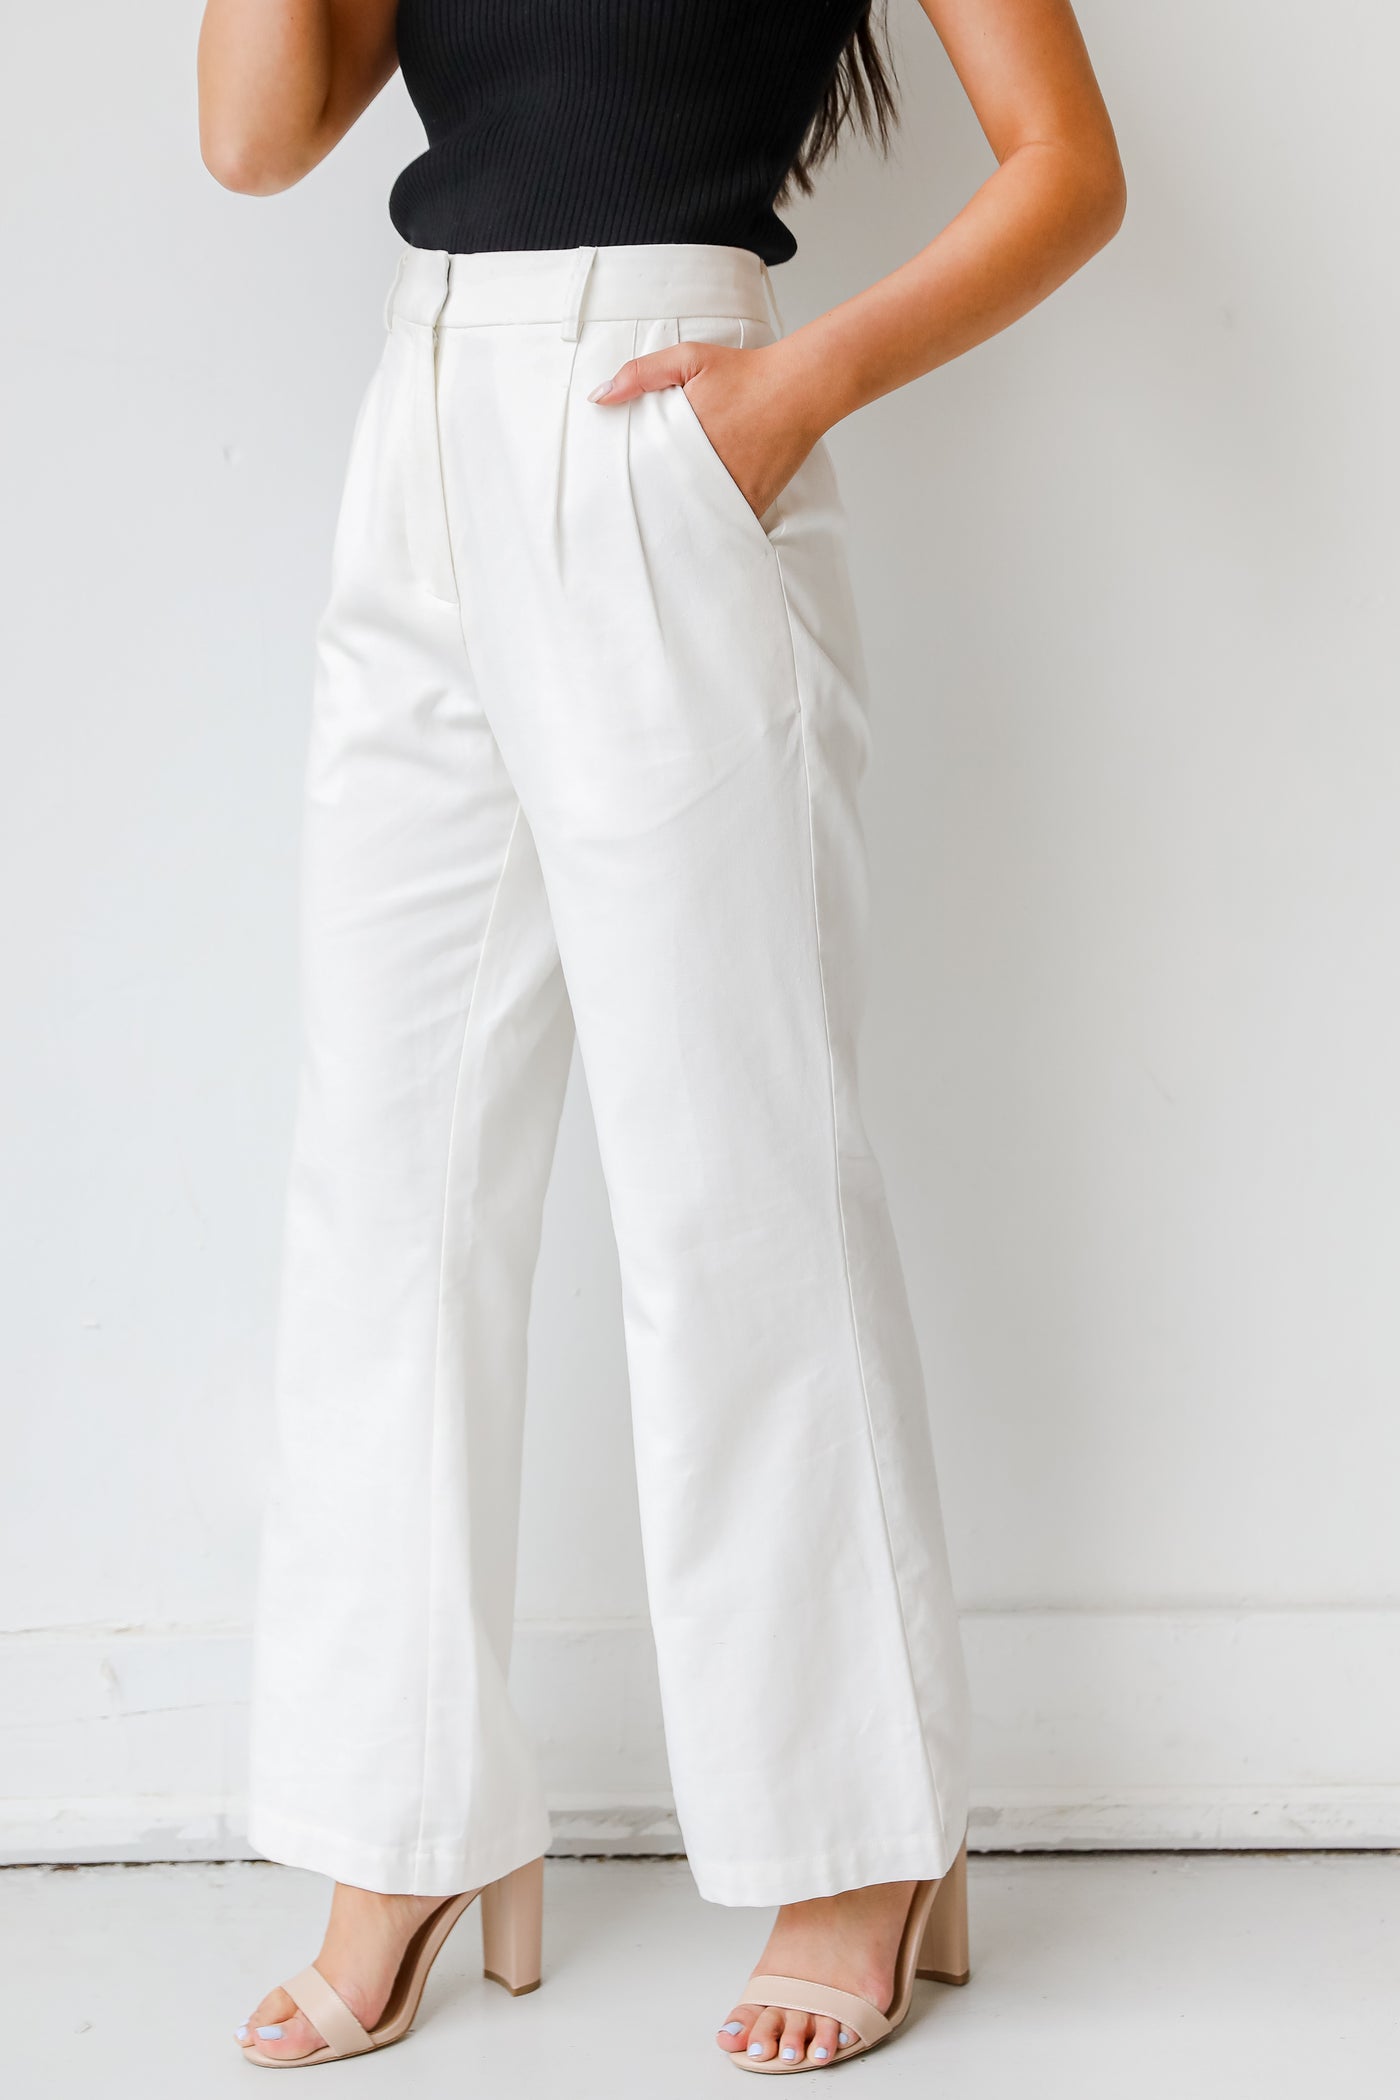 Trouser Pants in white side view